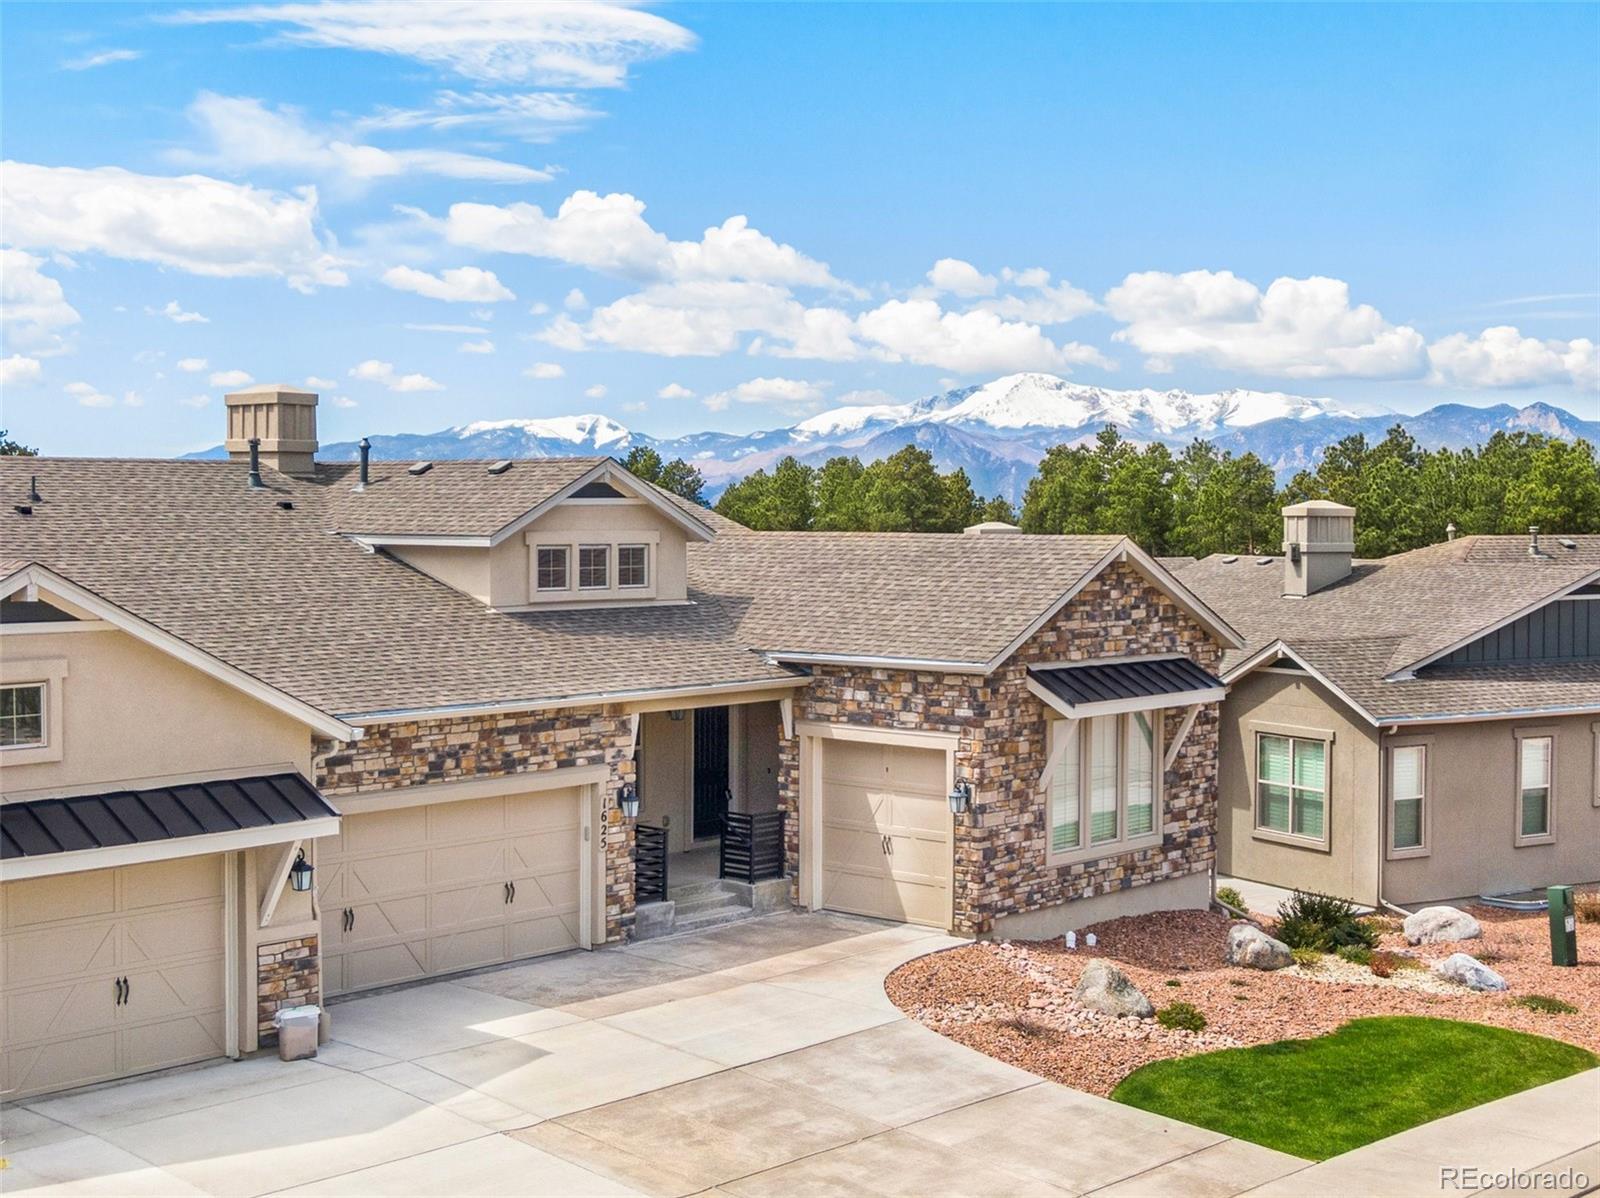 Photo one of 1625 Catnap Ln Monument CO 80132 | MLS 7157193